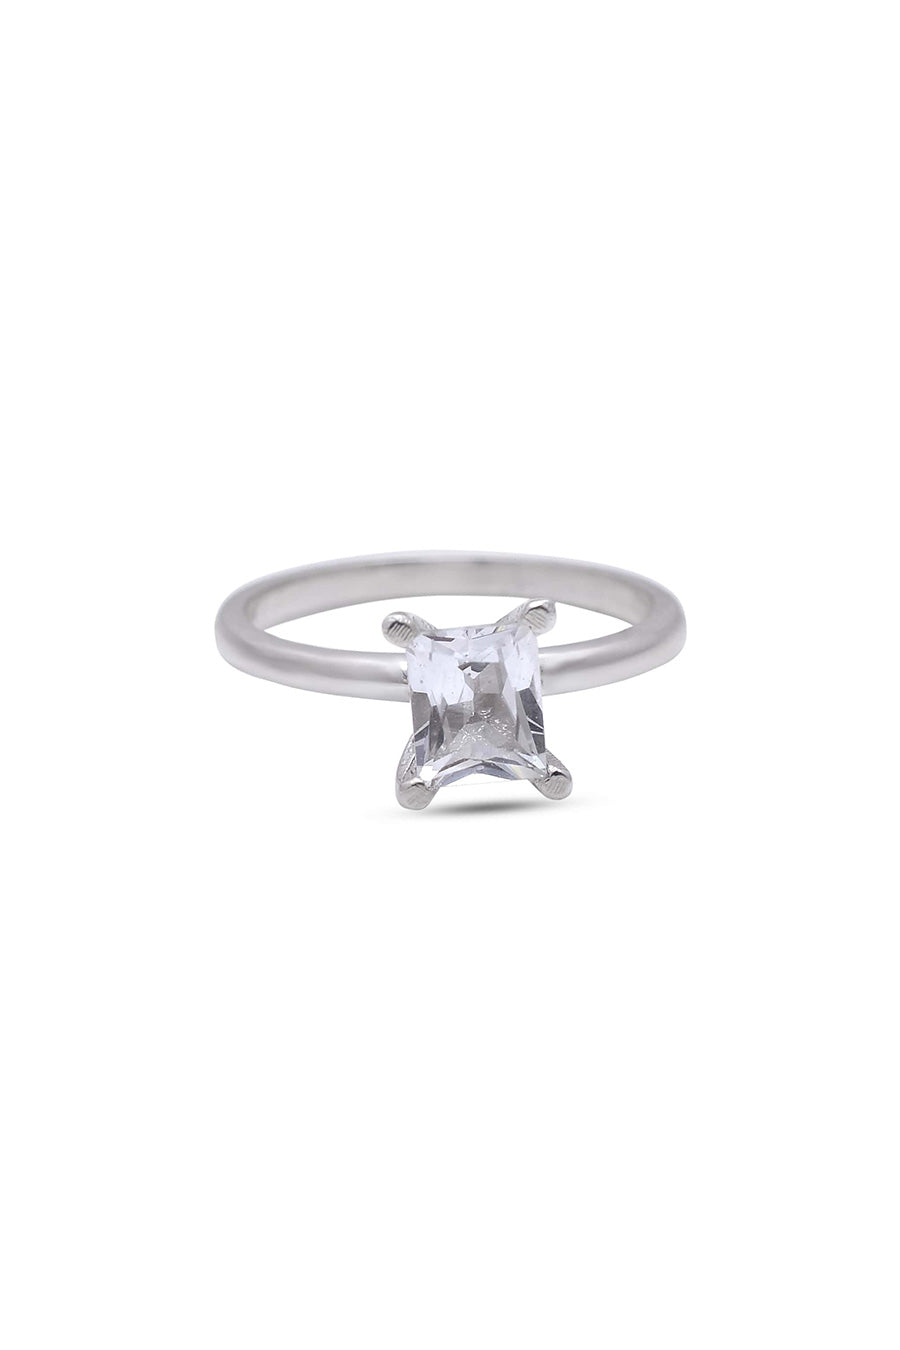 White Topaz Octagon Solitaire Ring in 925 Silver